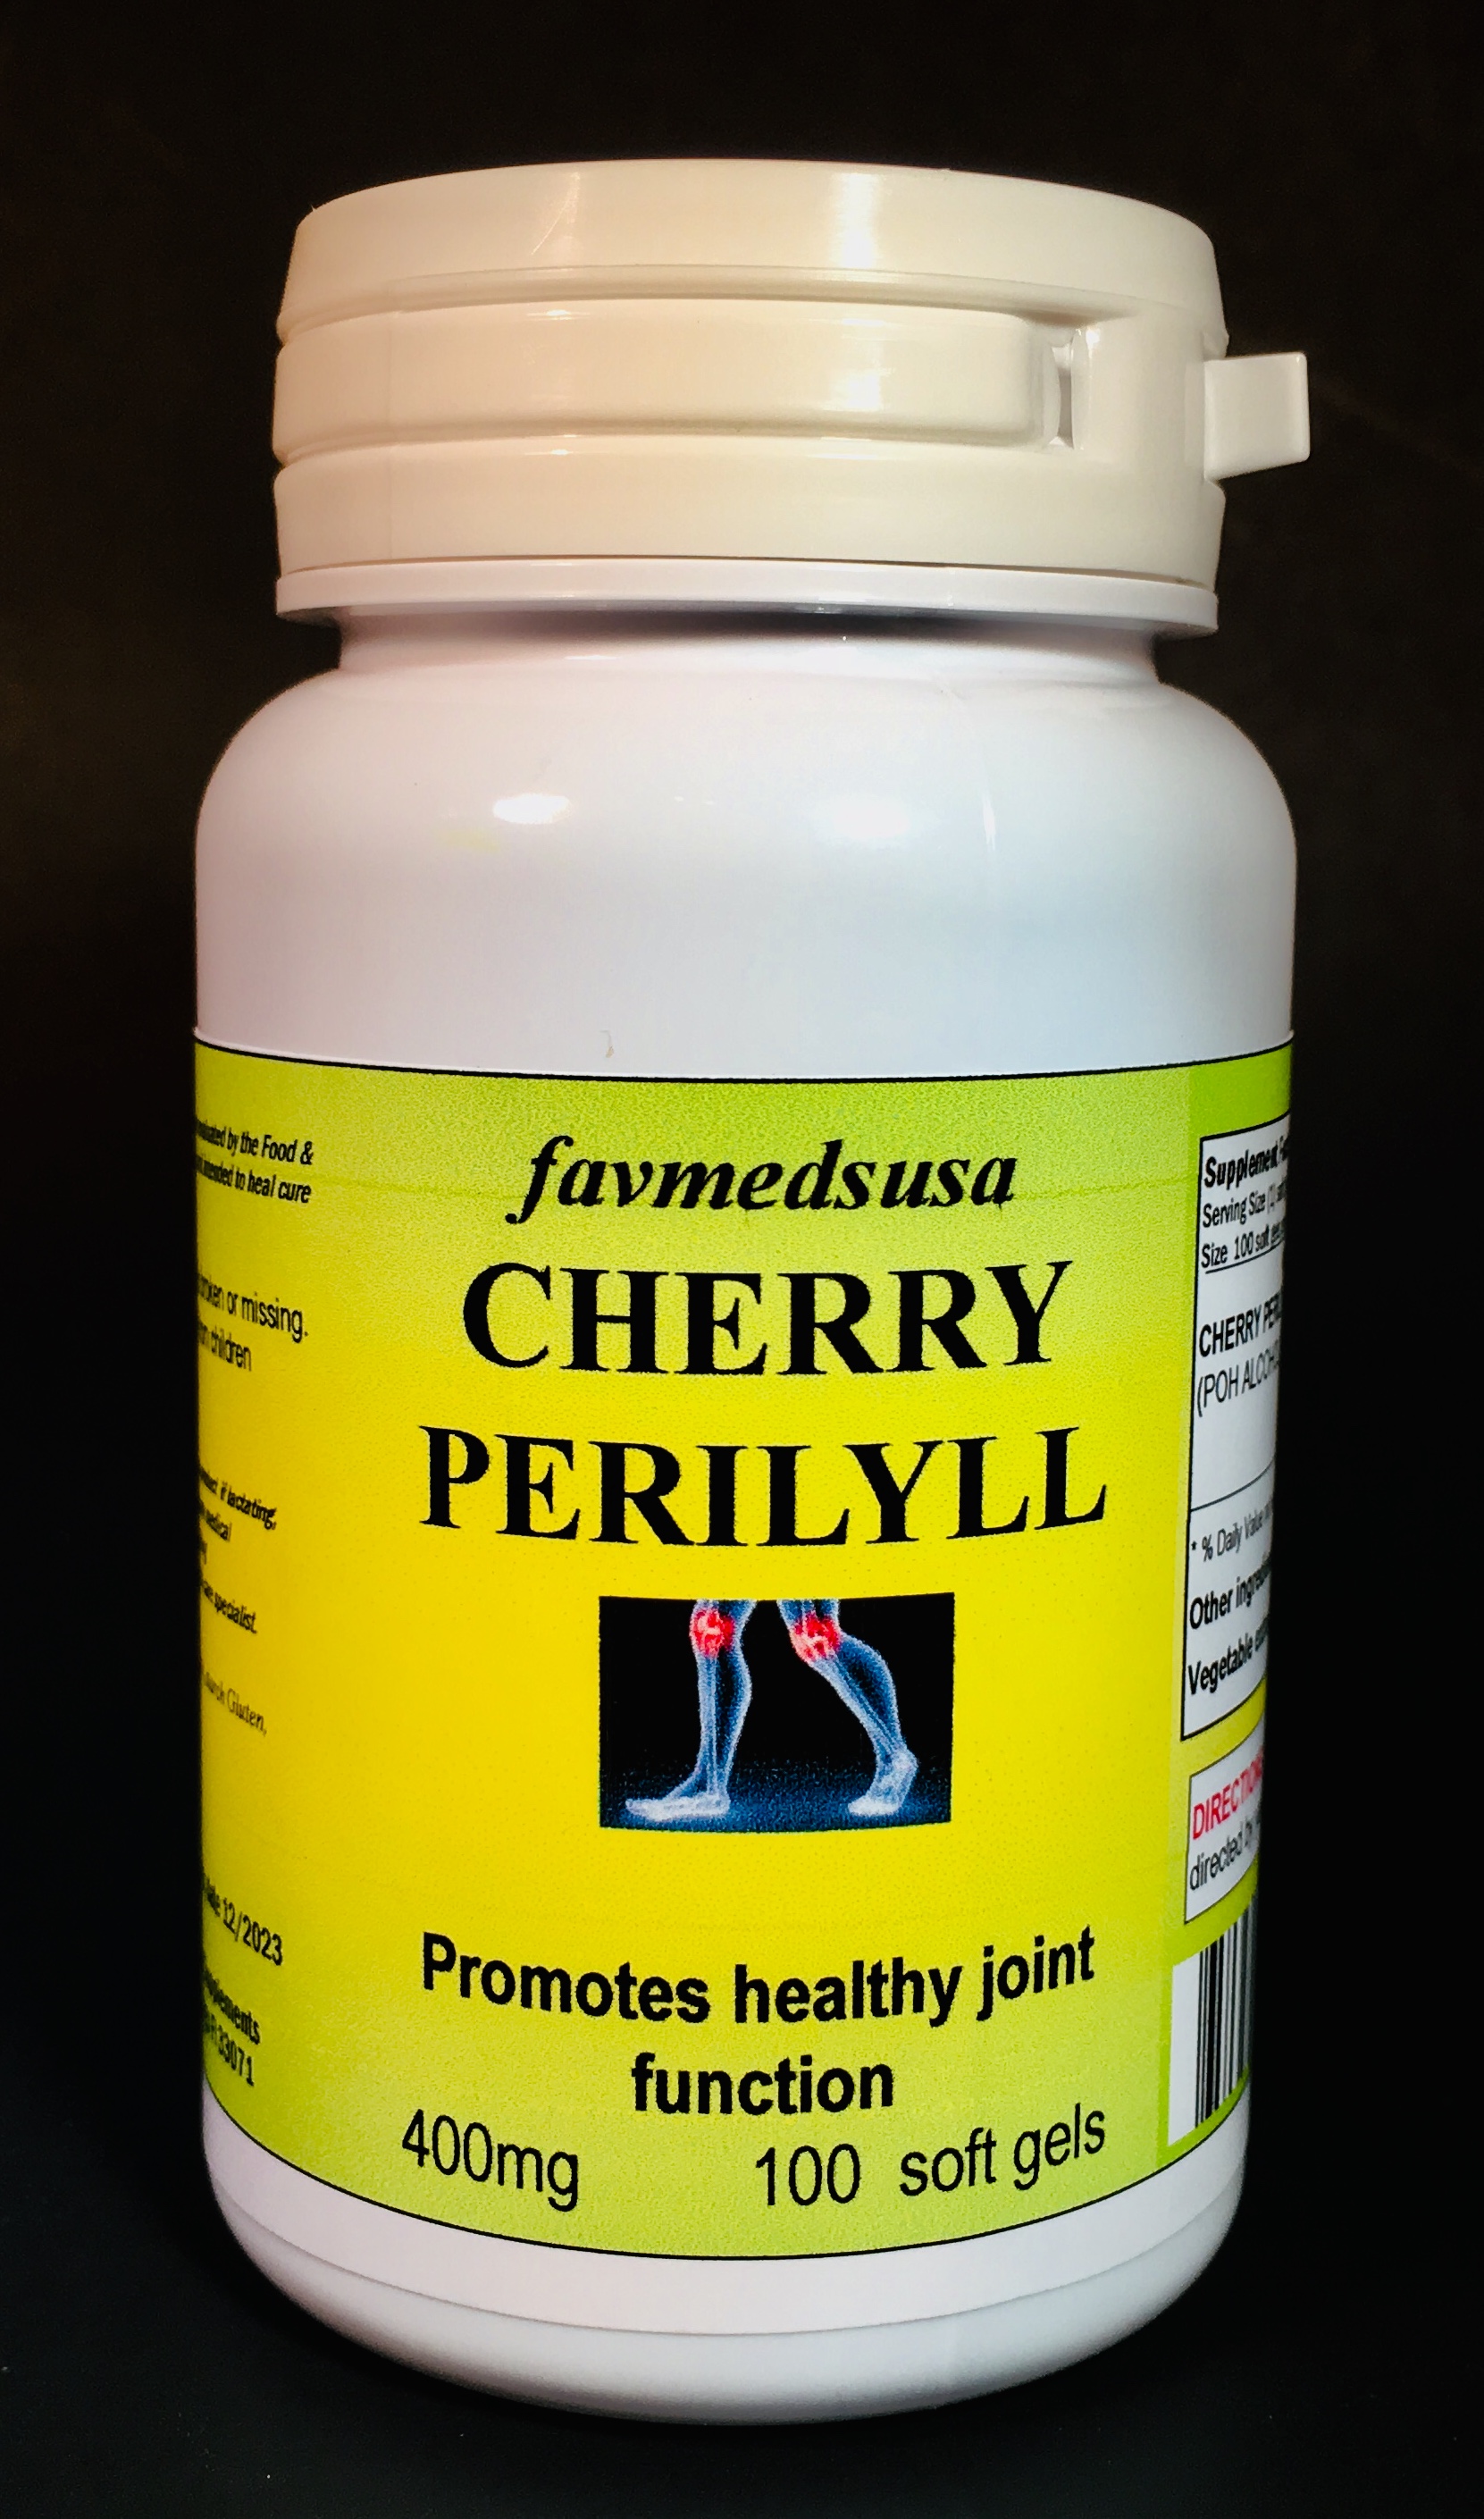 Cherry Perrillyl, Gout aid - 100 soft gels